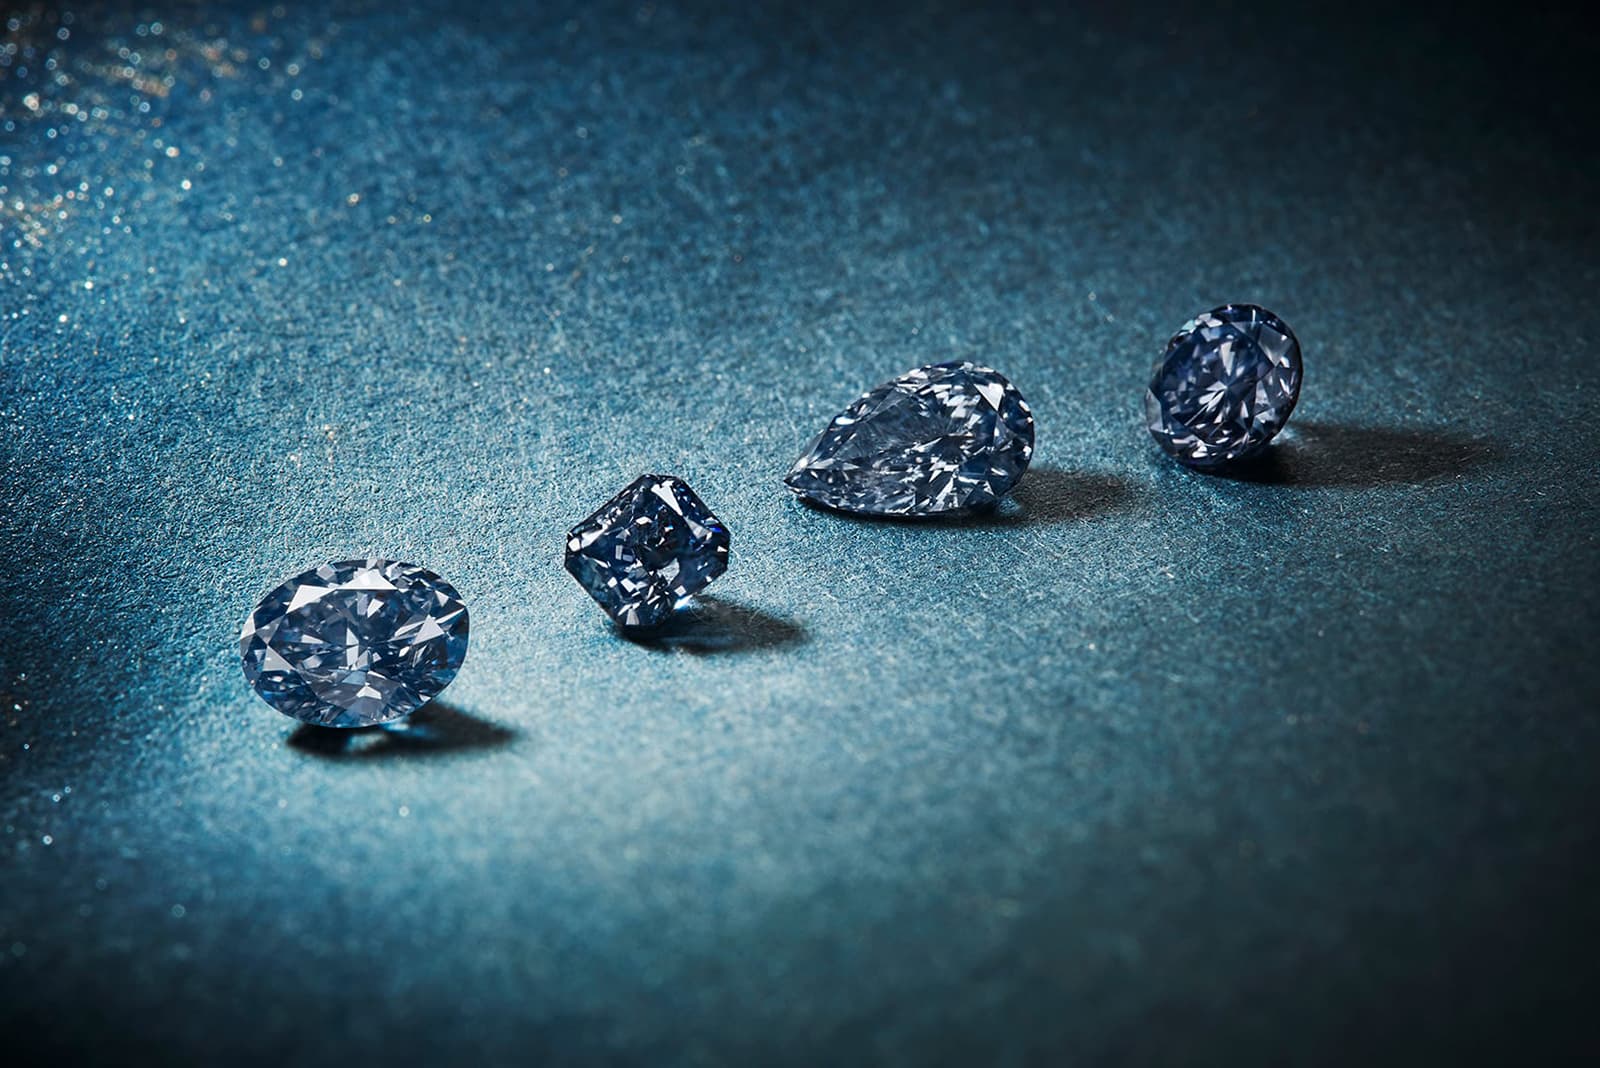 The ‘Once in a Blue Moon’ collection of 41 diamonds weighs 24.88 carats in total and represents the final blue and violet diamonds to emerge from the Argyle Mine